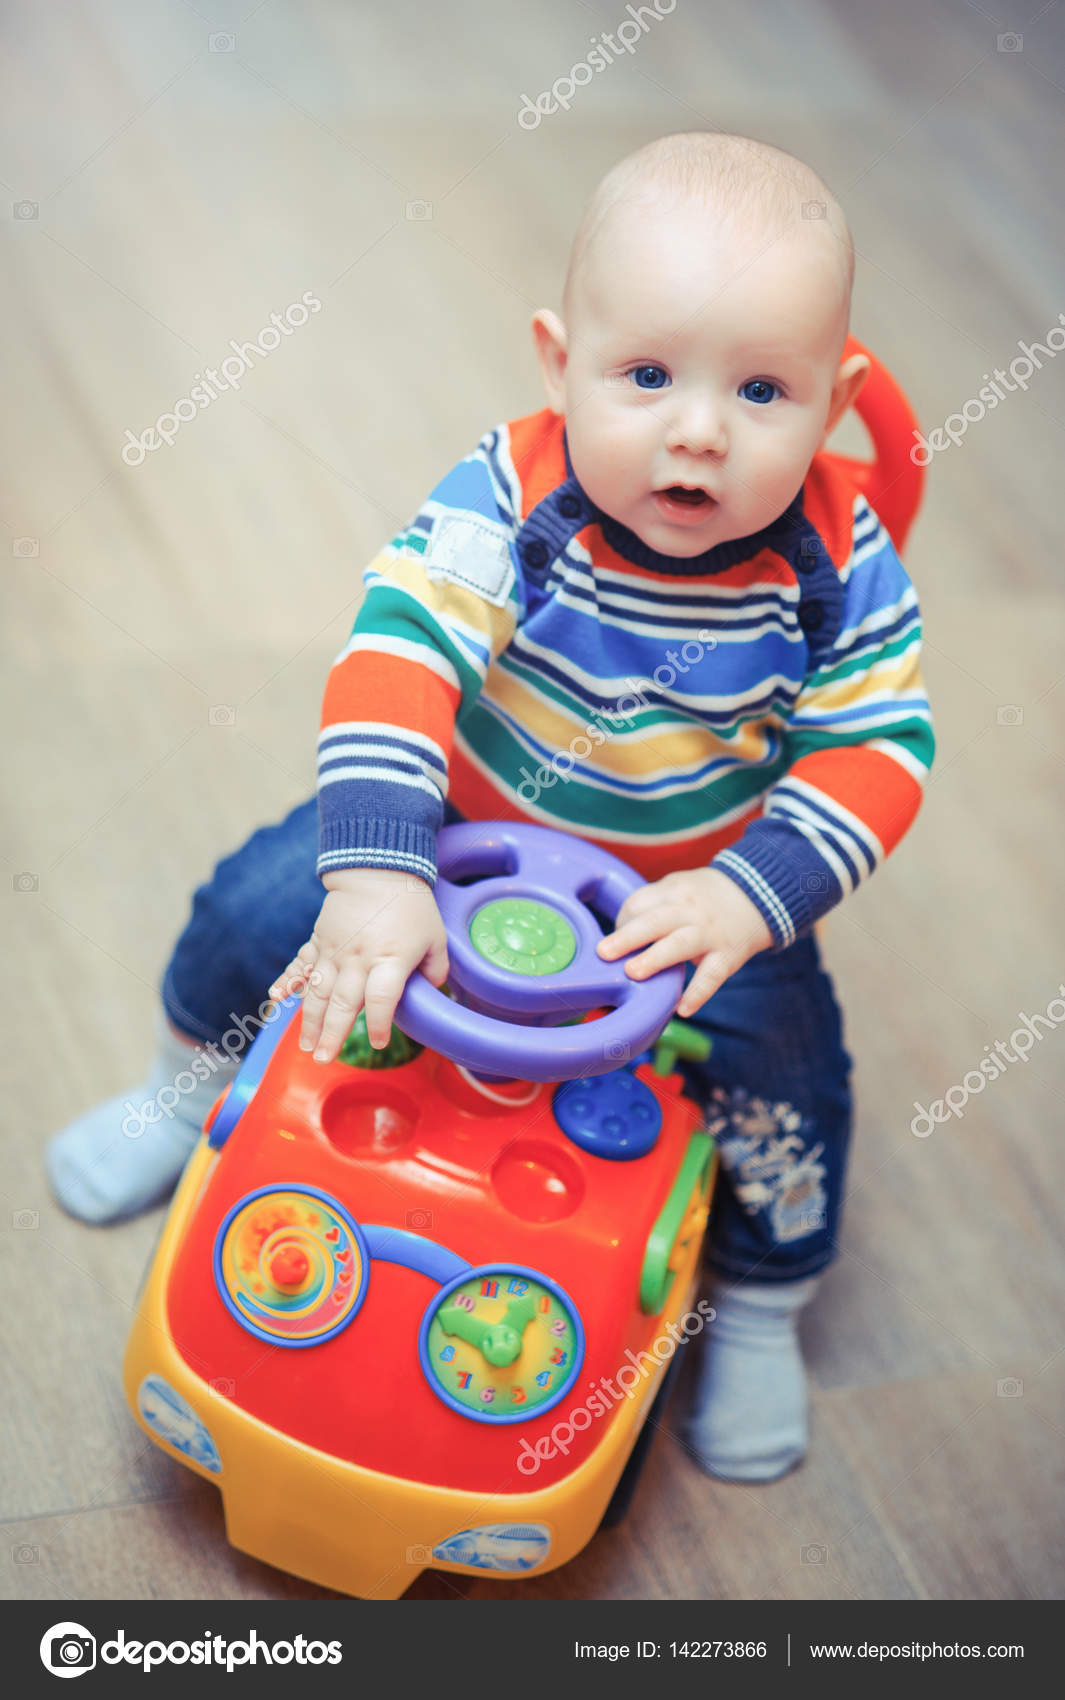 toy car baby sits in